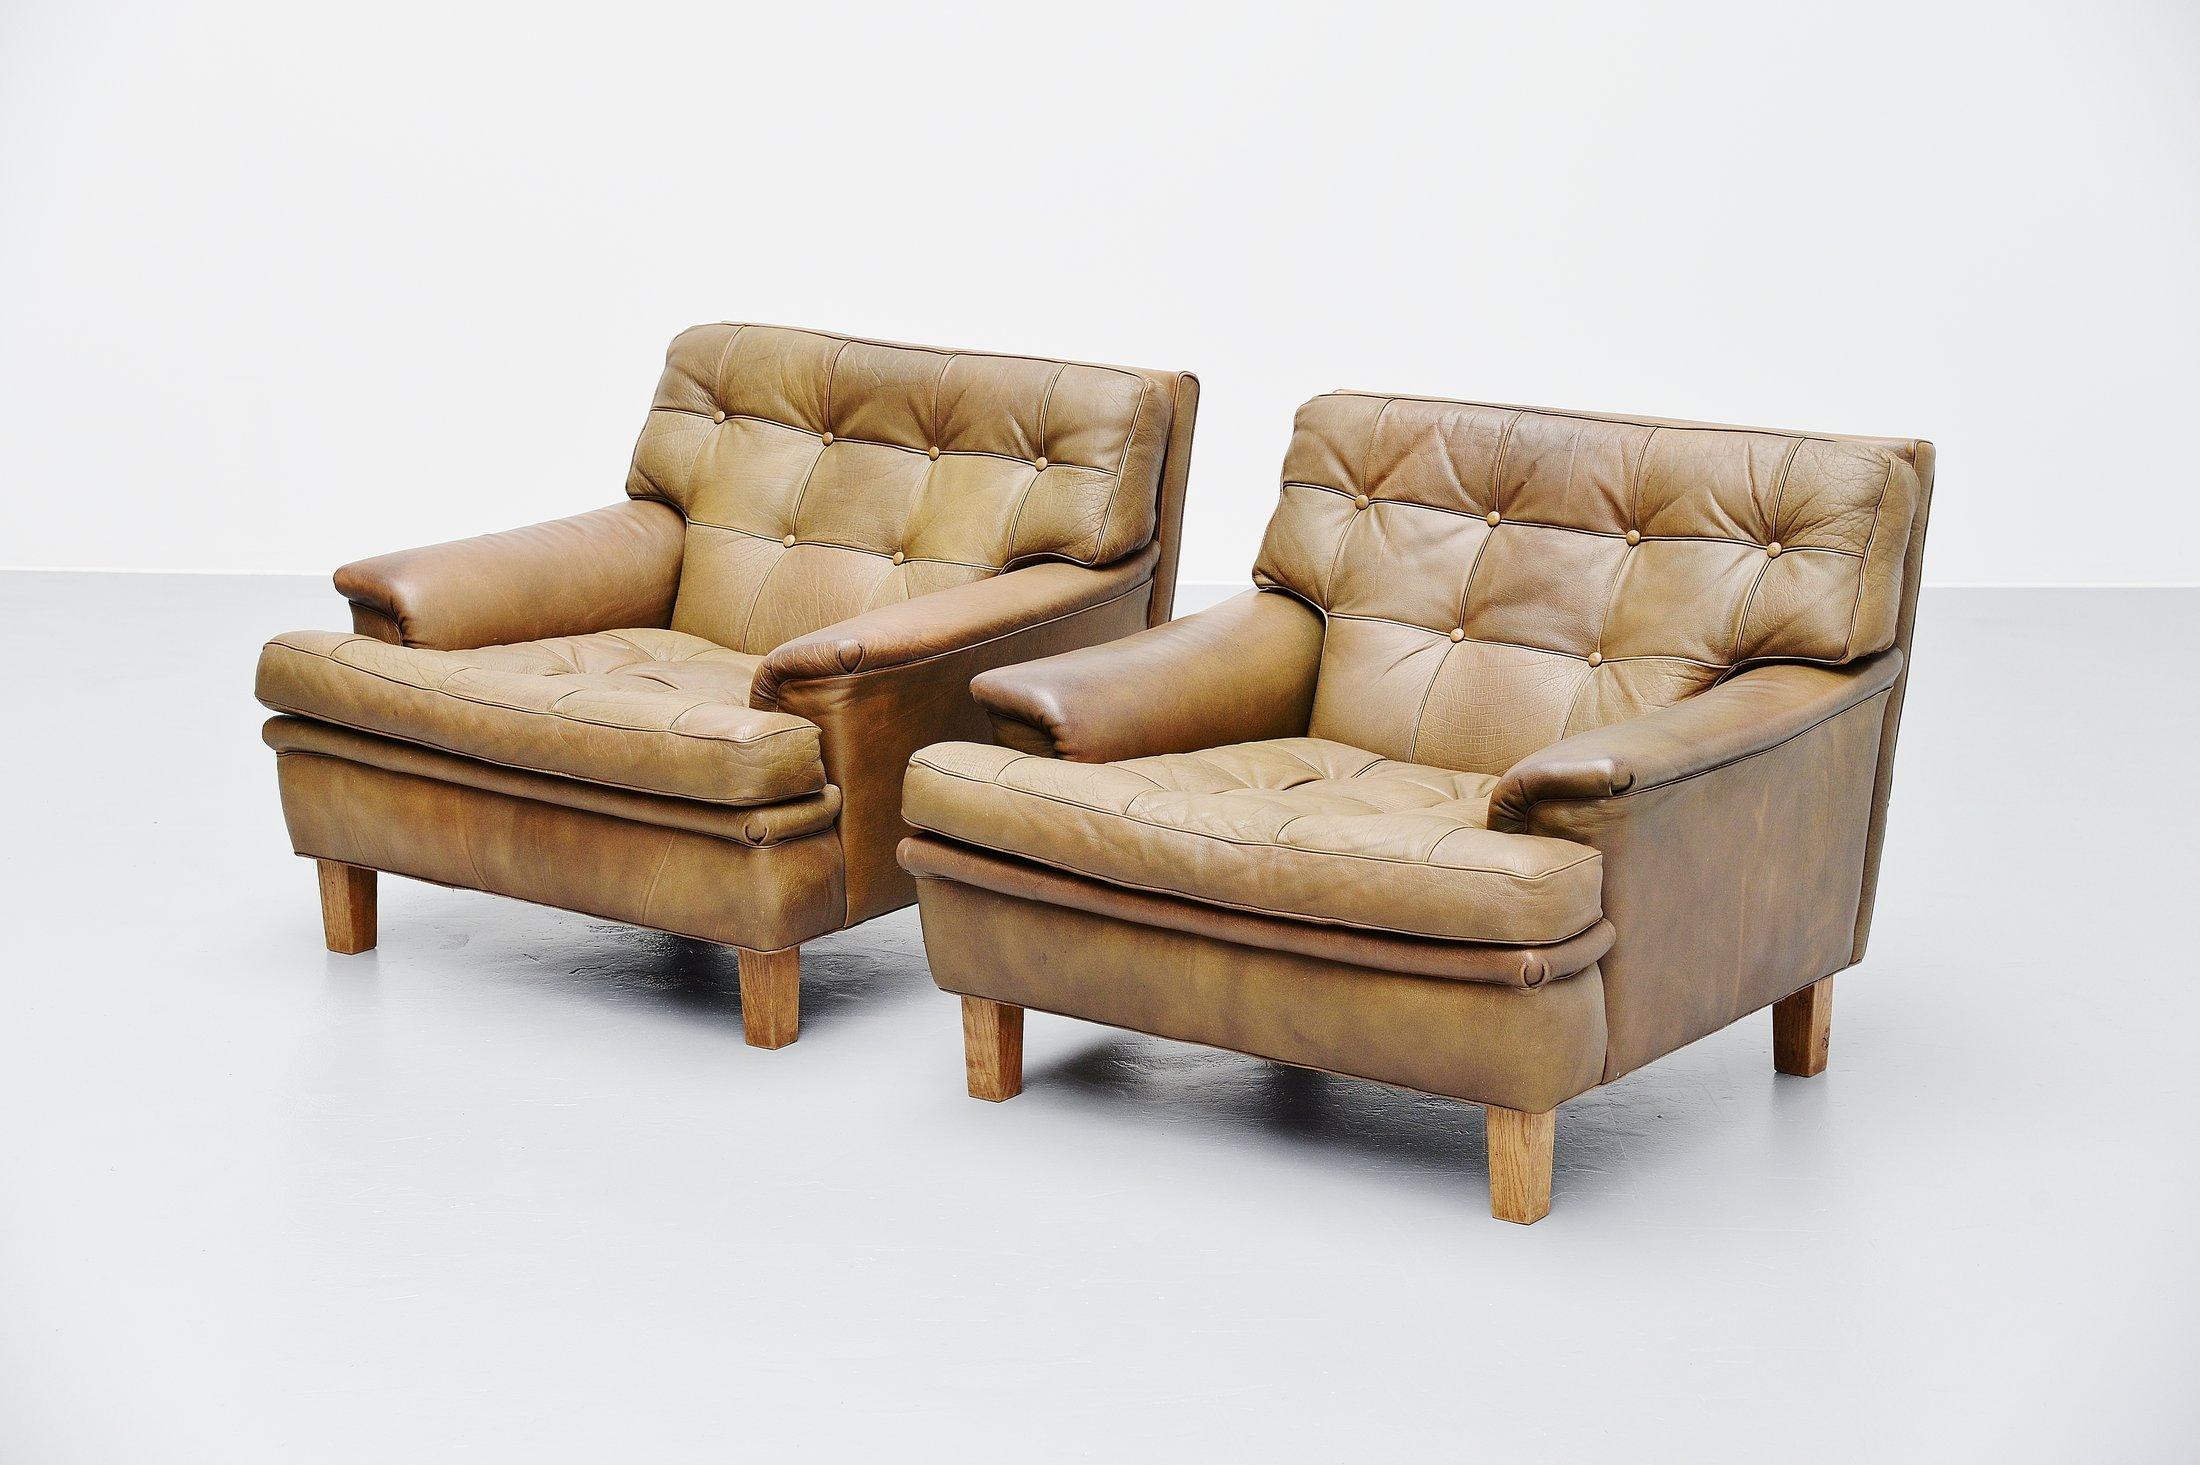 Arne Norell Merkur Lounge Chairs AB, Sweden, 1960 In Good Condition In Roosendaal, Noord Brabant